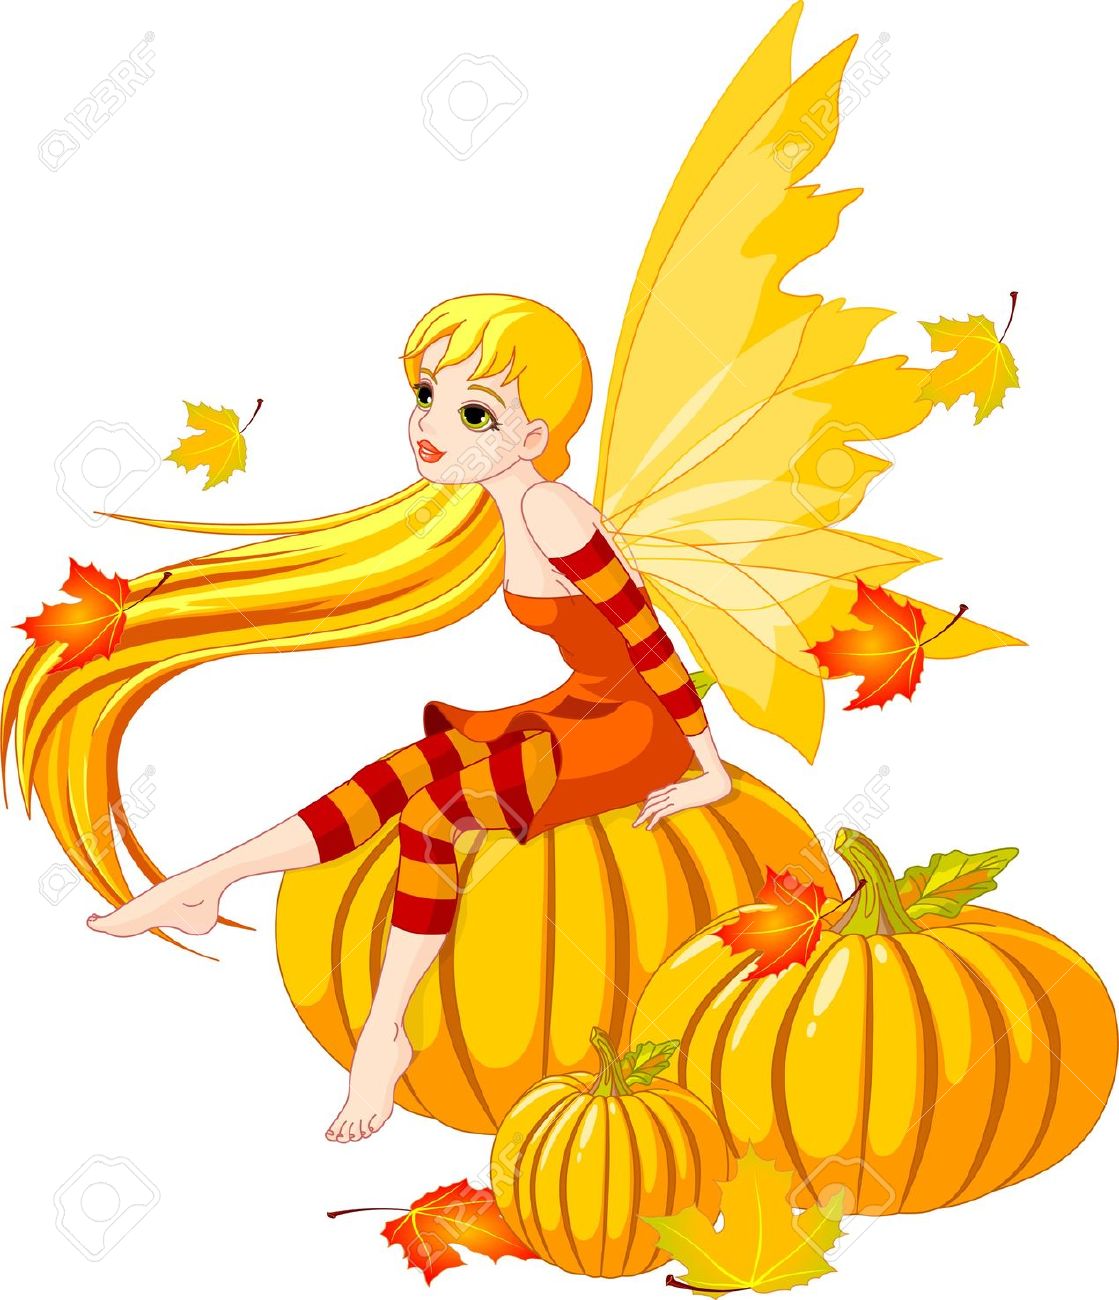 Elf Fairy clipart #12, Download drawings